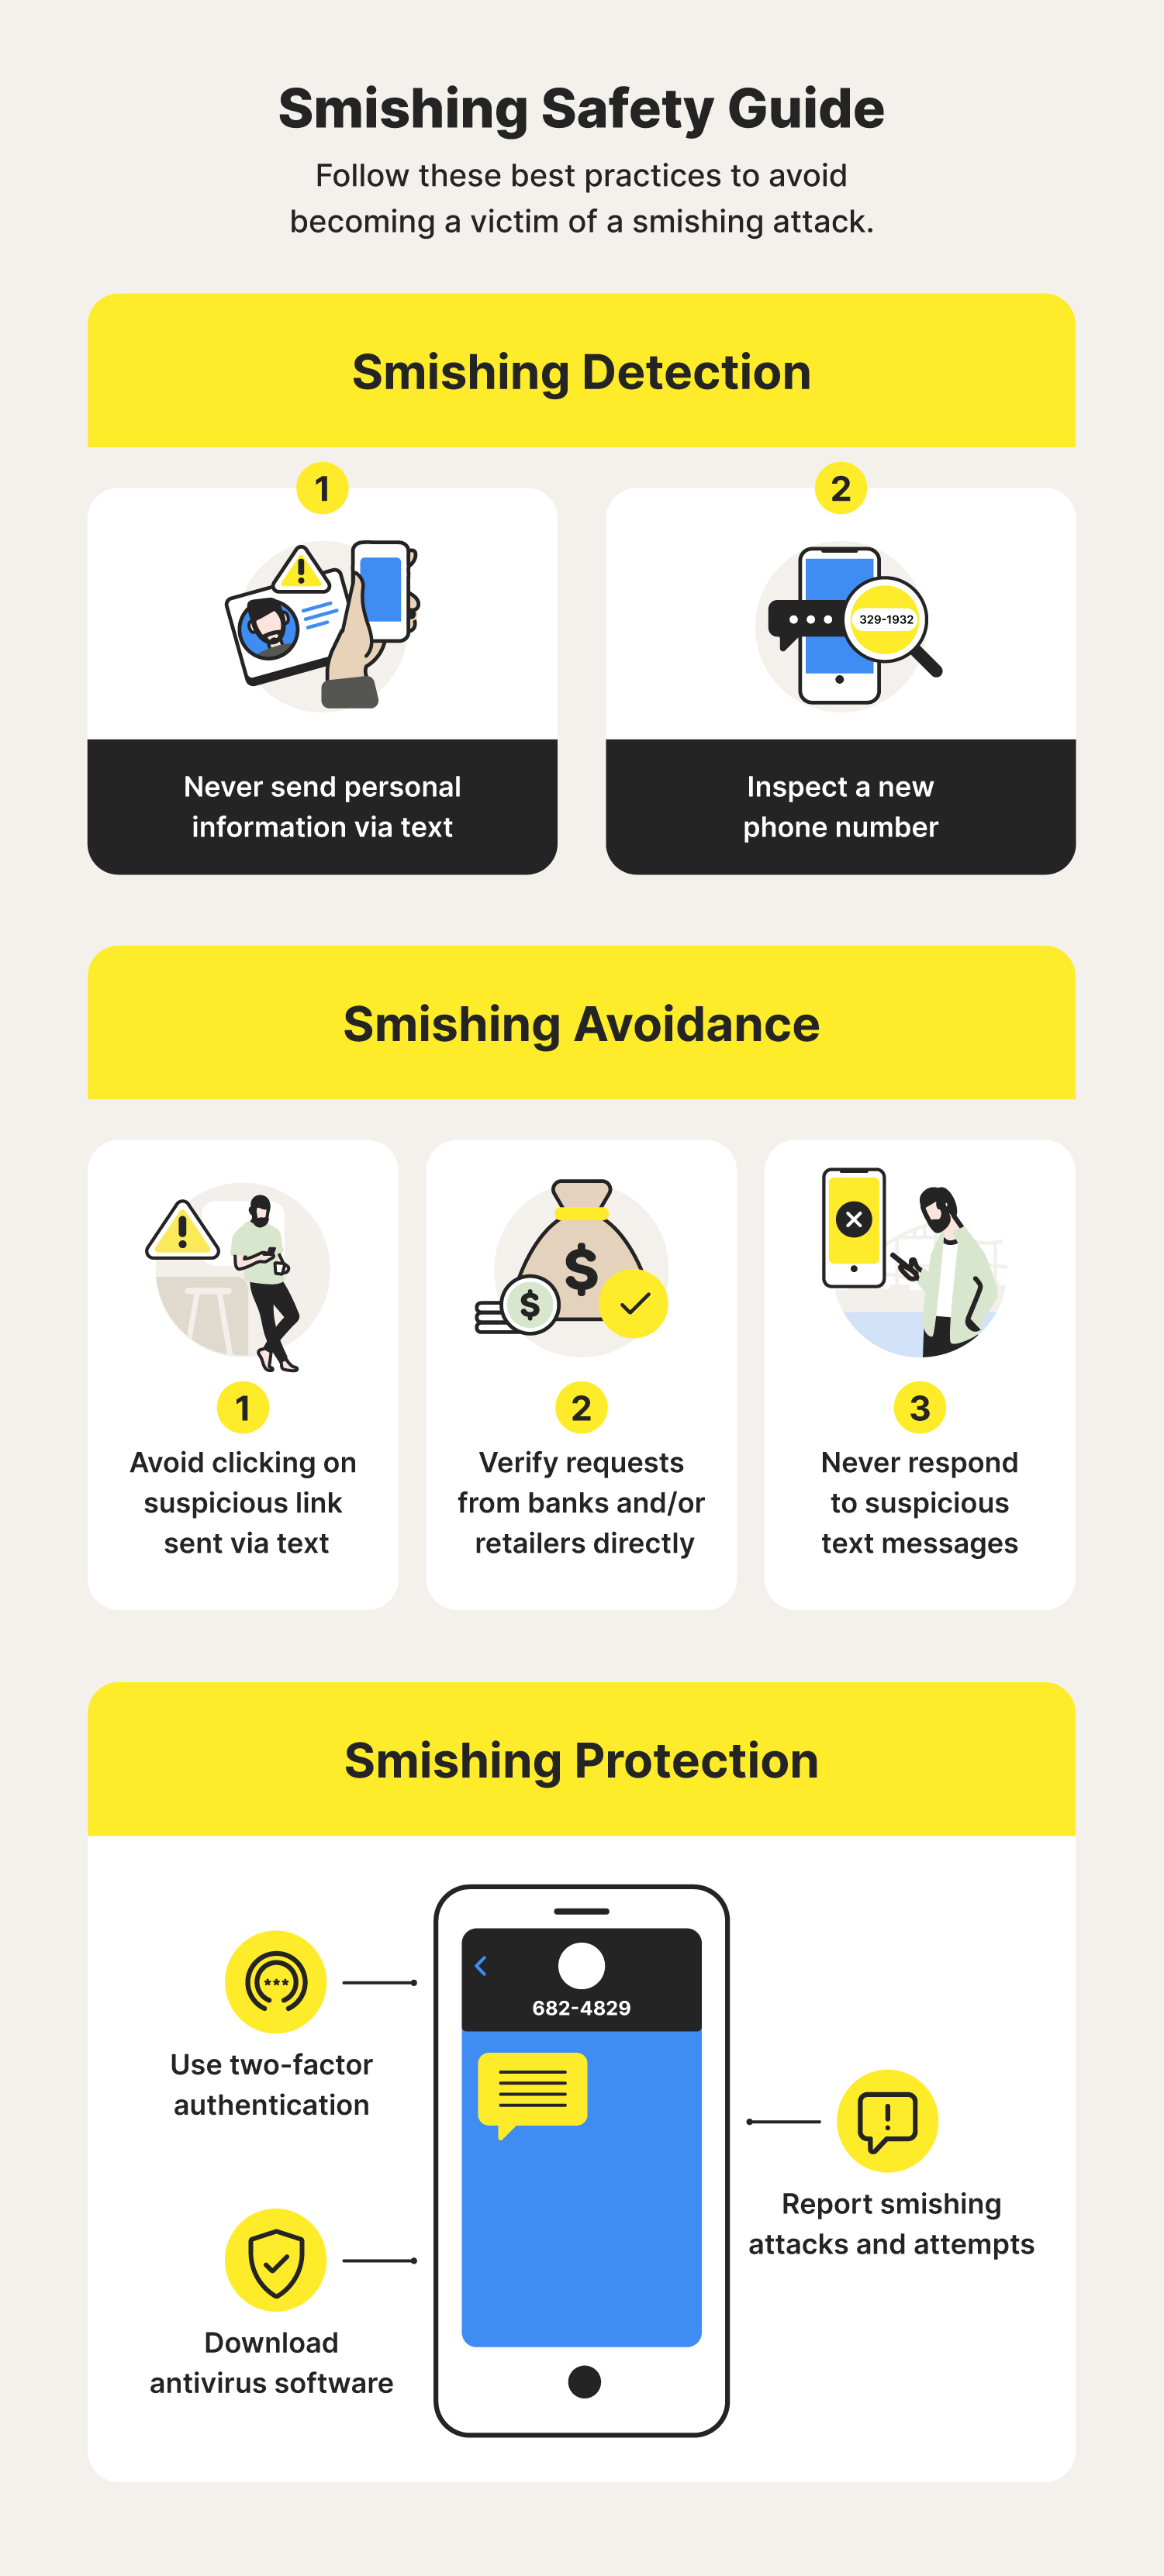 A smishing safety guide reviews smishing detection, smishing avoidance, and smishing protection. 